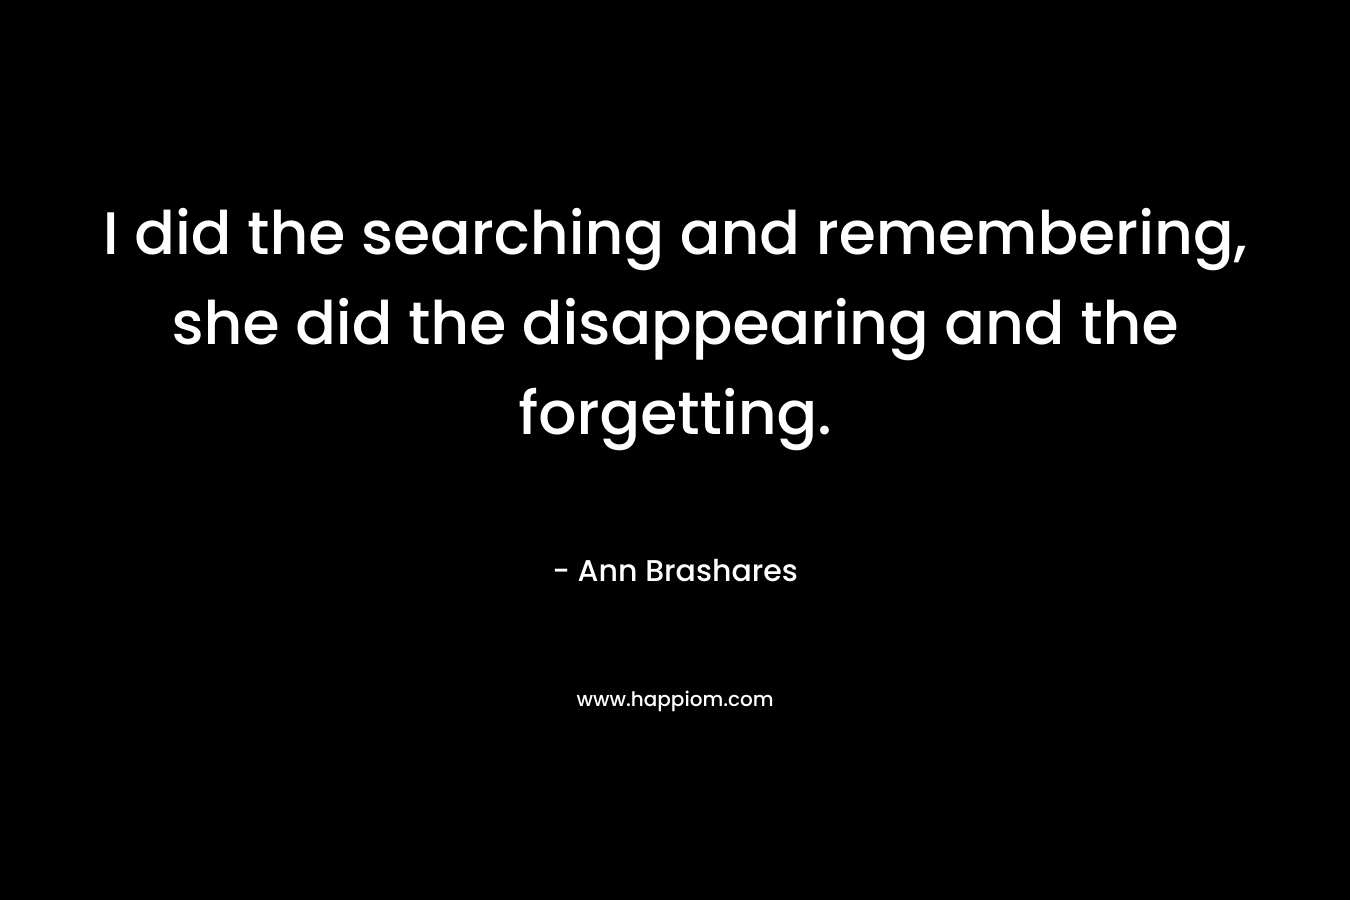 I did the searching and remembering, she did the disappearing and the forgetting.